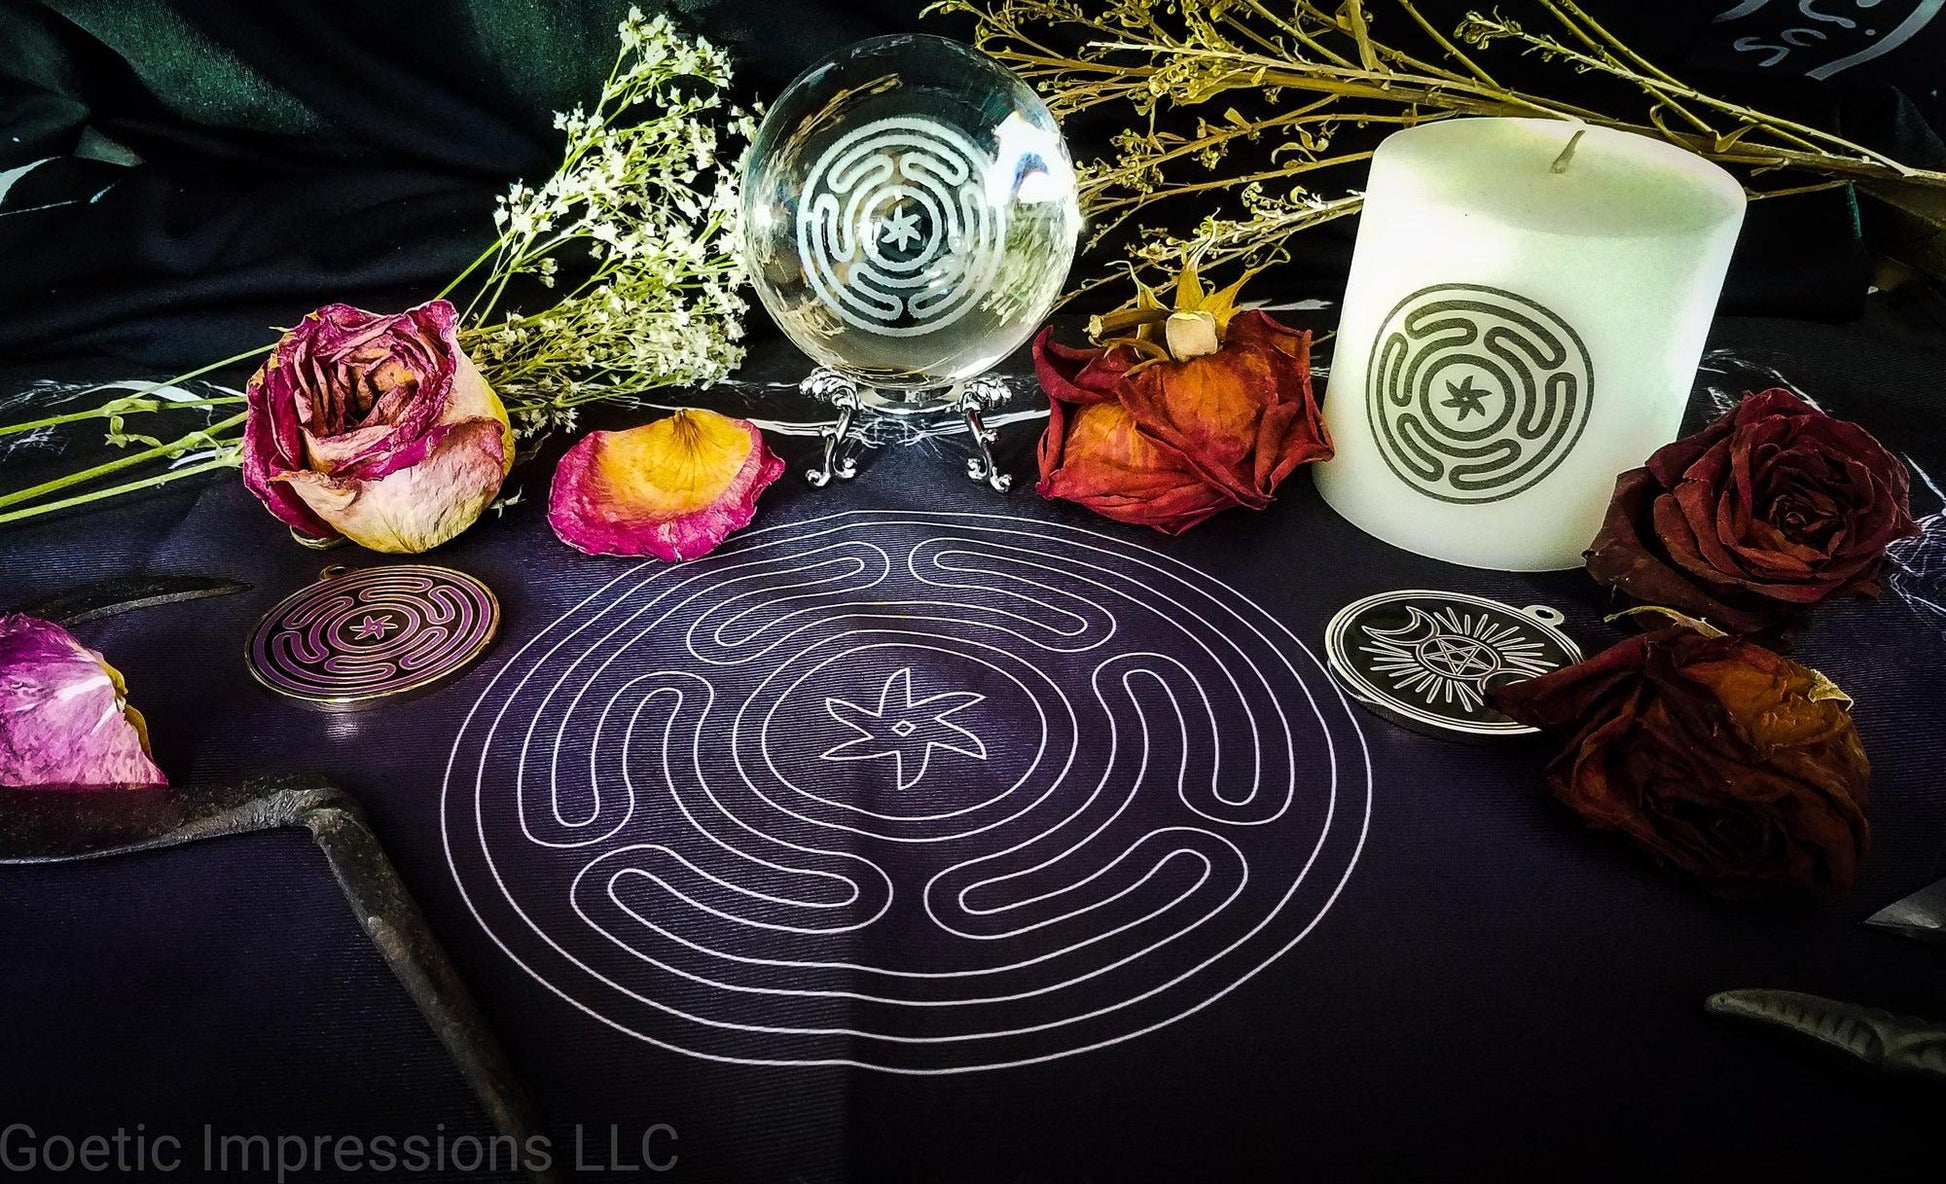 An altar with vrarious ritual tools featuring the Stropholos or Wheel of Hecate. The sigil is printed on a black and purple altar cloth. On the cloth is a white candle, a crystal ball and a gold medallion featuring the sigil. Roses and other dried herbs are decorated around the altar.